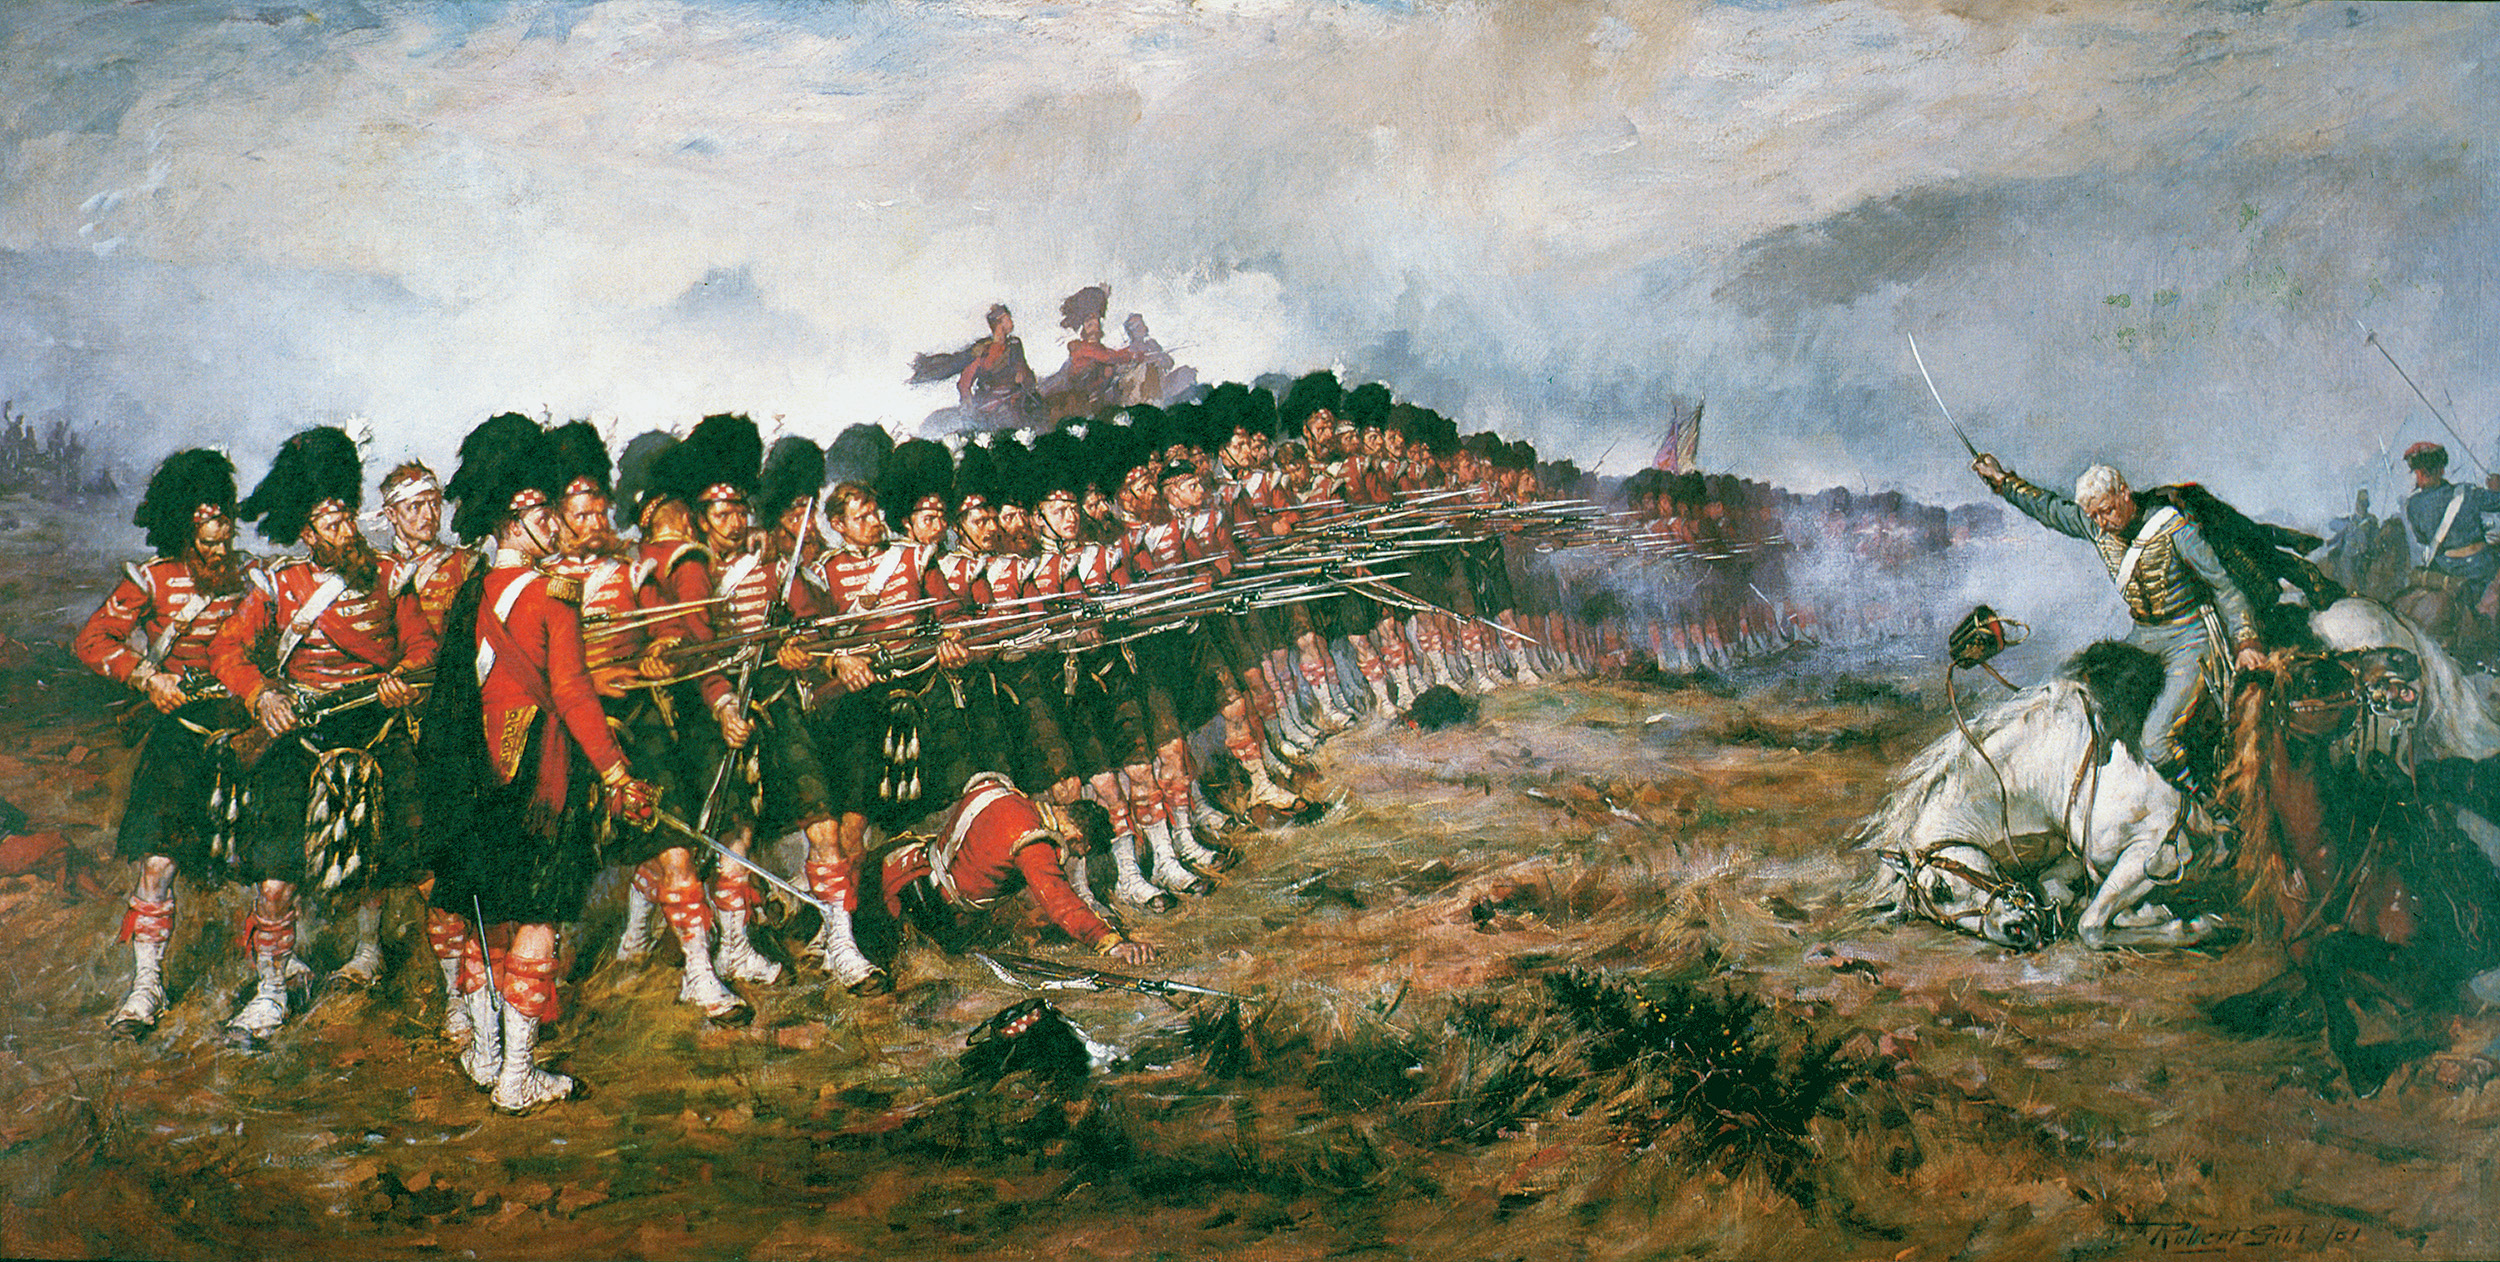 “There is no retreat from here, men,” said the commander, and despite the thundering Russian Hussars, the “Thin Red Line” of Highlanders held and turned back the charge.  